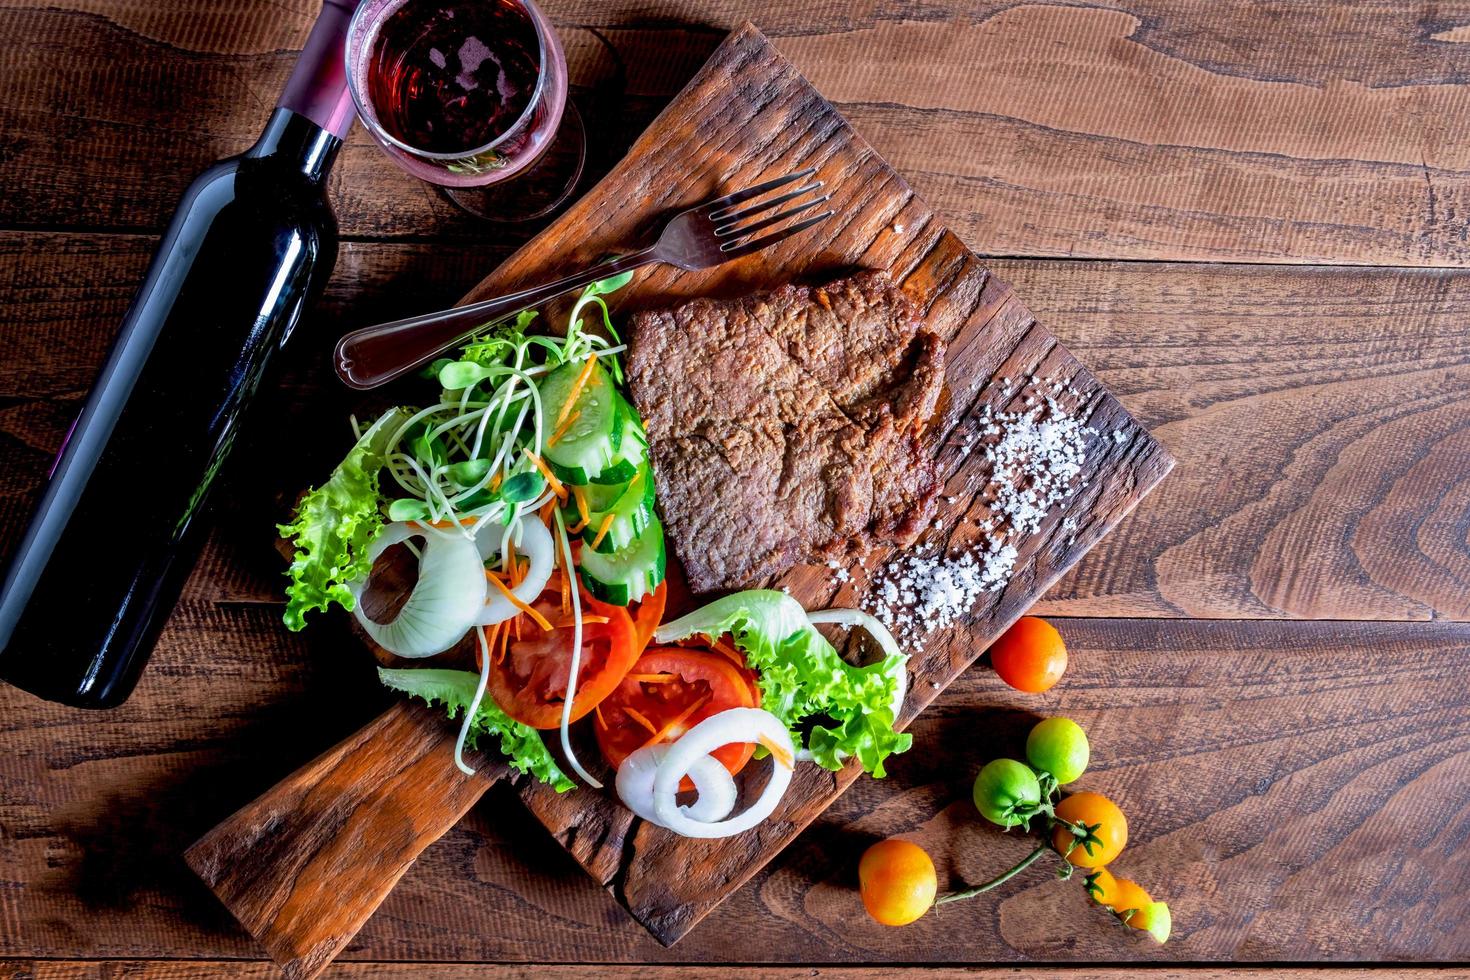 Steak and salad on a wooden cutting board photo